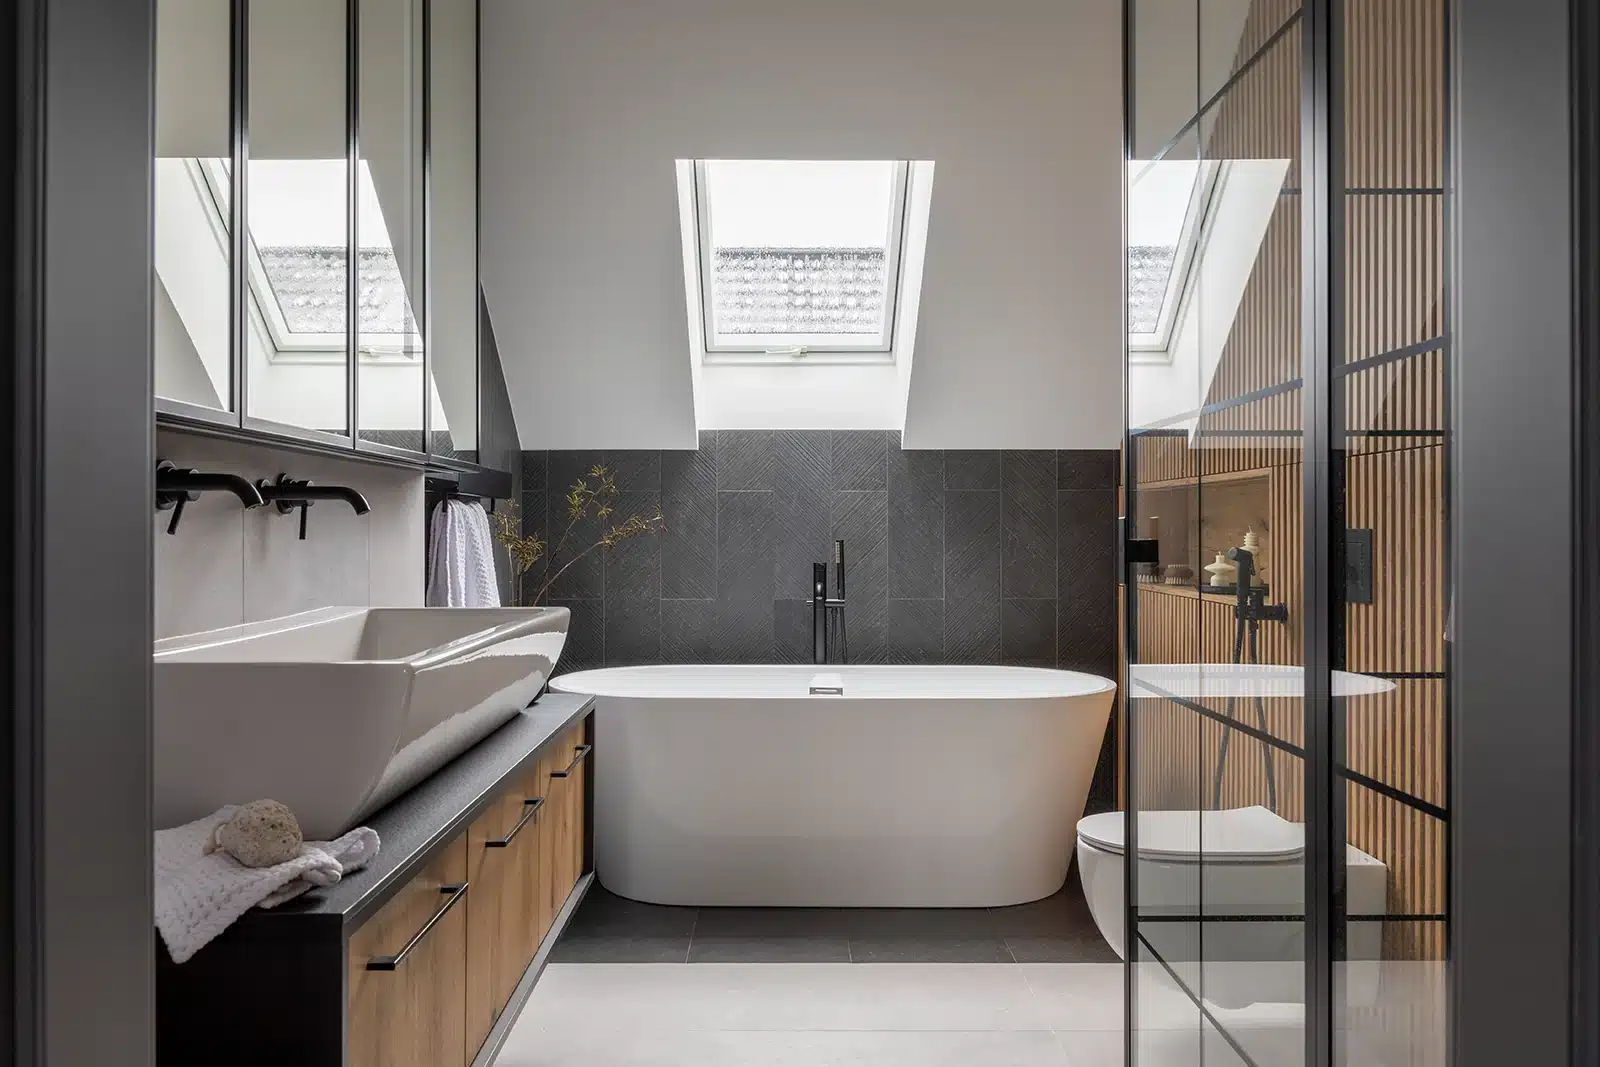 Modern bathroom remodel in Federal Way with a white freestanding bathtub, dark grey tiled walls, wooden vanity with dual sinks, and a glass-enclosed shower area.